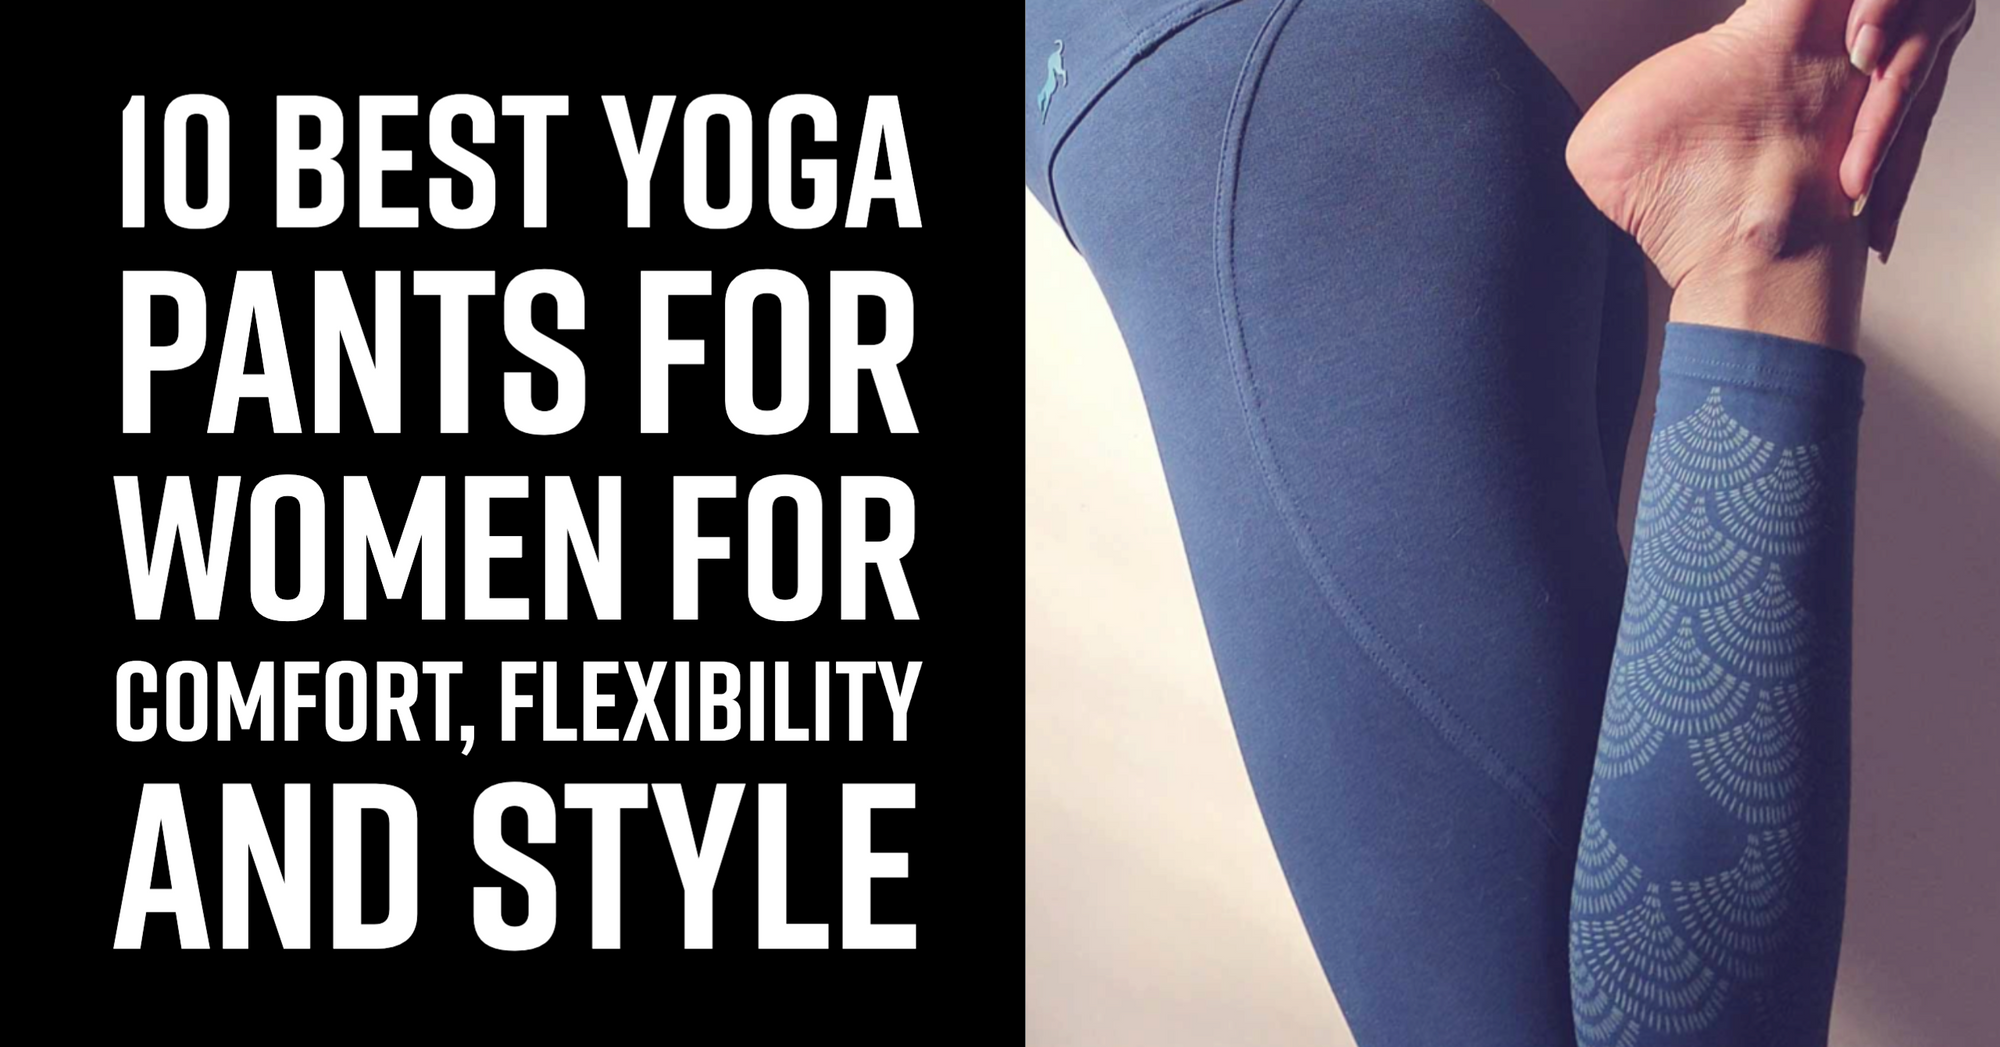 10 Best Yoga Pants for Women for Comfort, Flexibility and Style